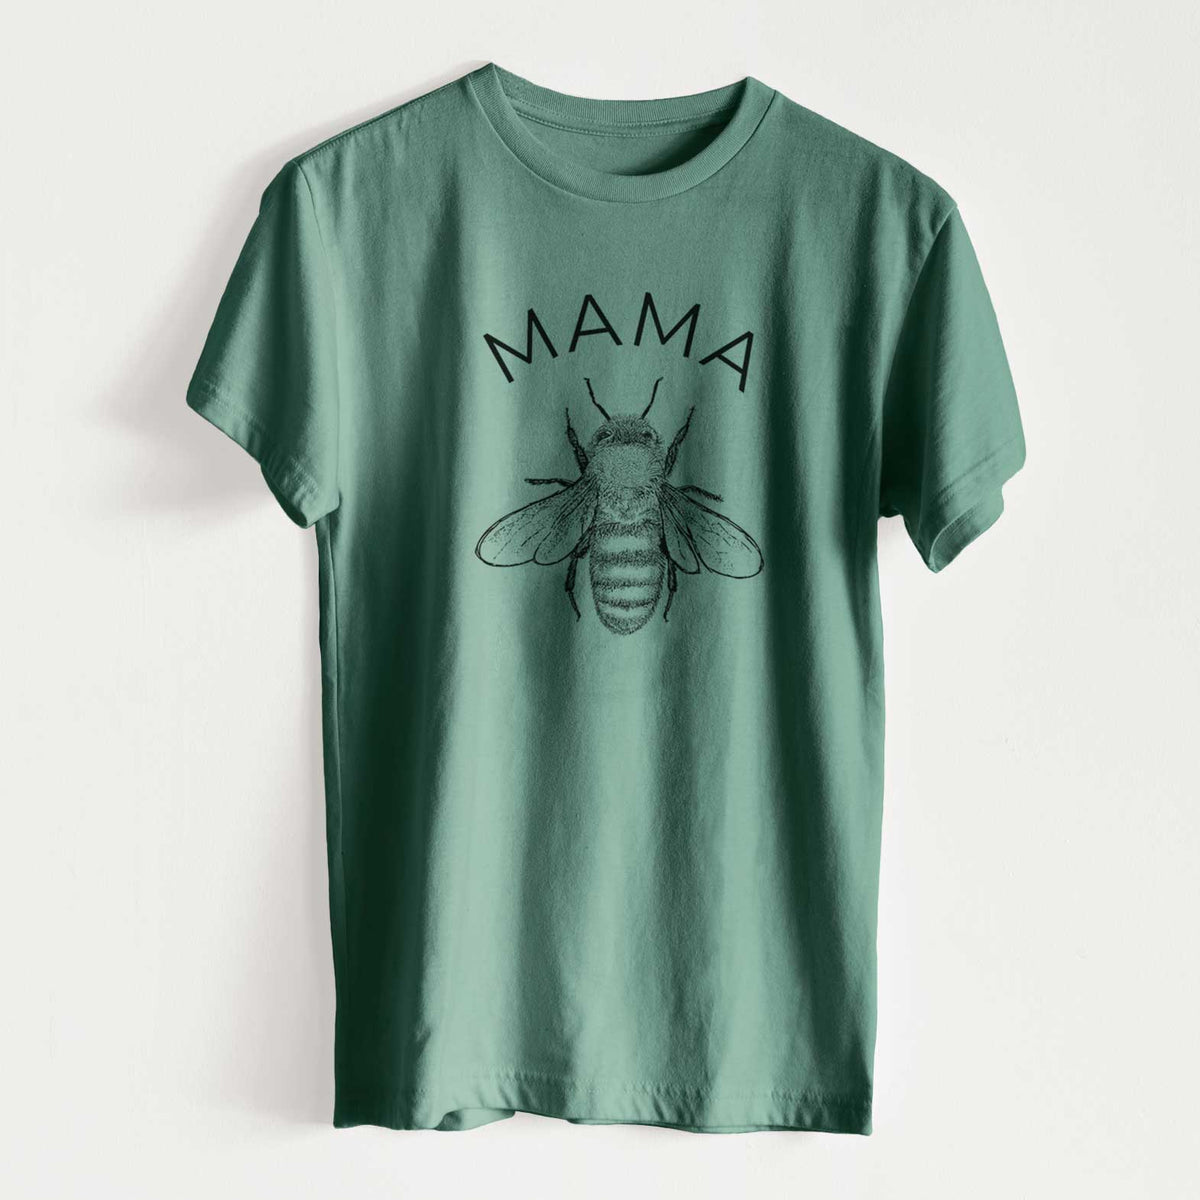 Mama Bee - Unisex Recycled Eco Tee  - CLOSEOUT - FINAL SALE